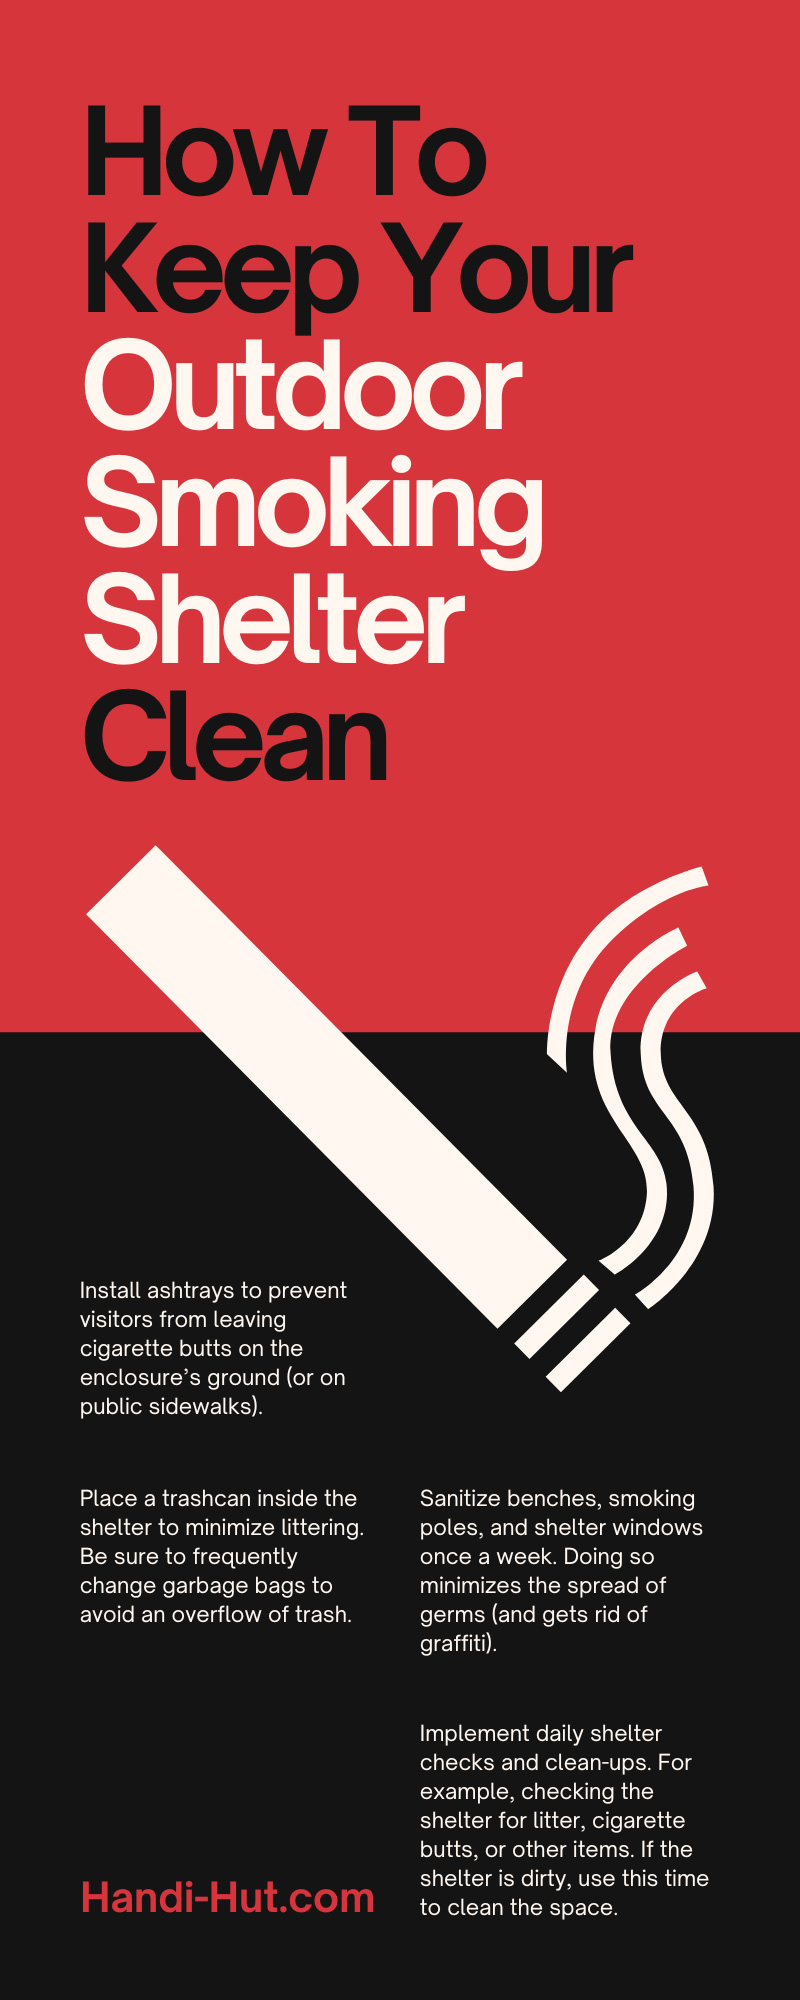 How To Keep Your Outdoor Smoking Shelter Clean